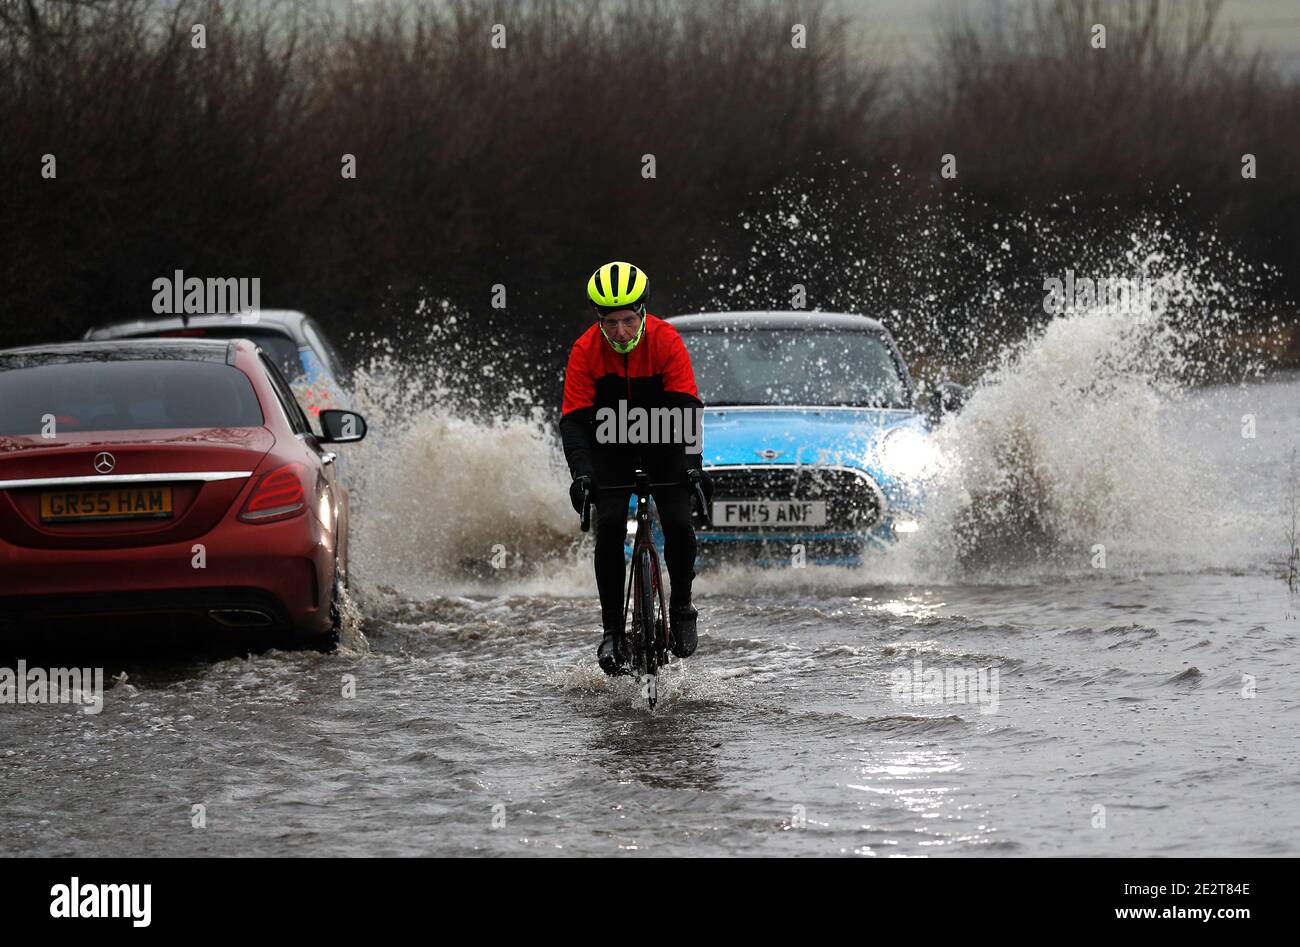 Leicester, Leicestershire, UK. 15th January 2021. UK weather.  A man rides through flooding in Loughborough after the Met Office warned of below freezing temperatures across many parts of England after heaving rain and snow. Credit Darren Staples/Alamy Live News. Stock Photo